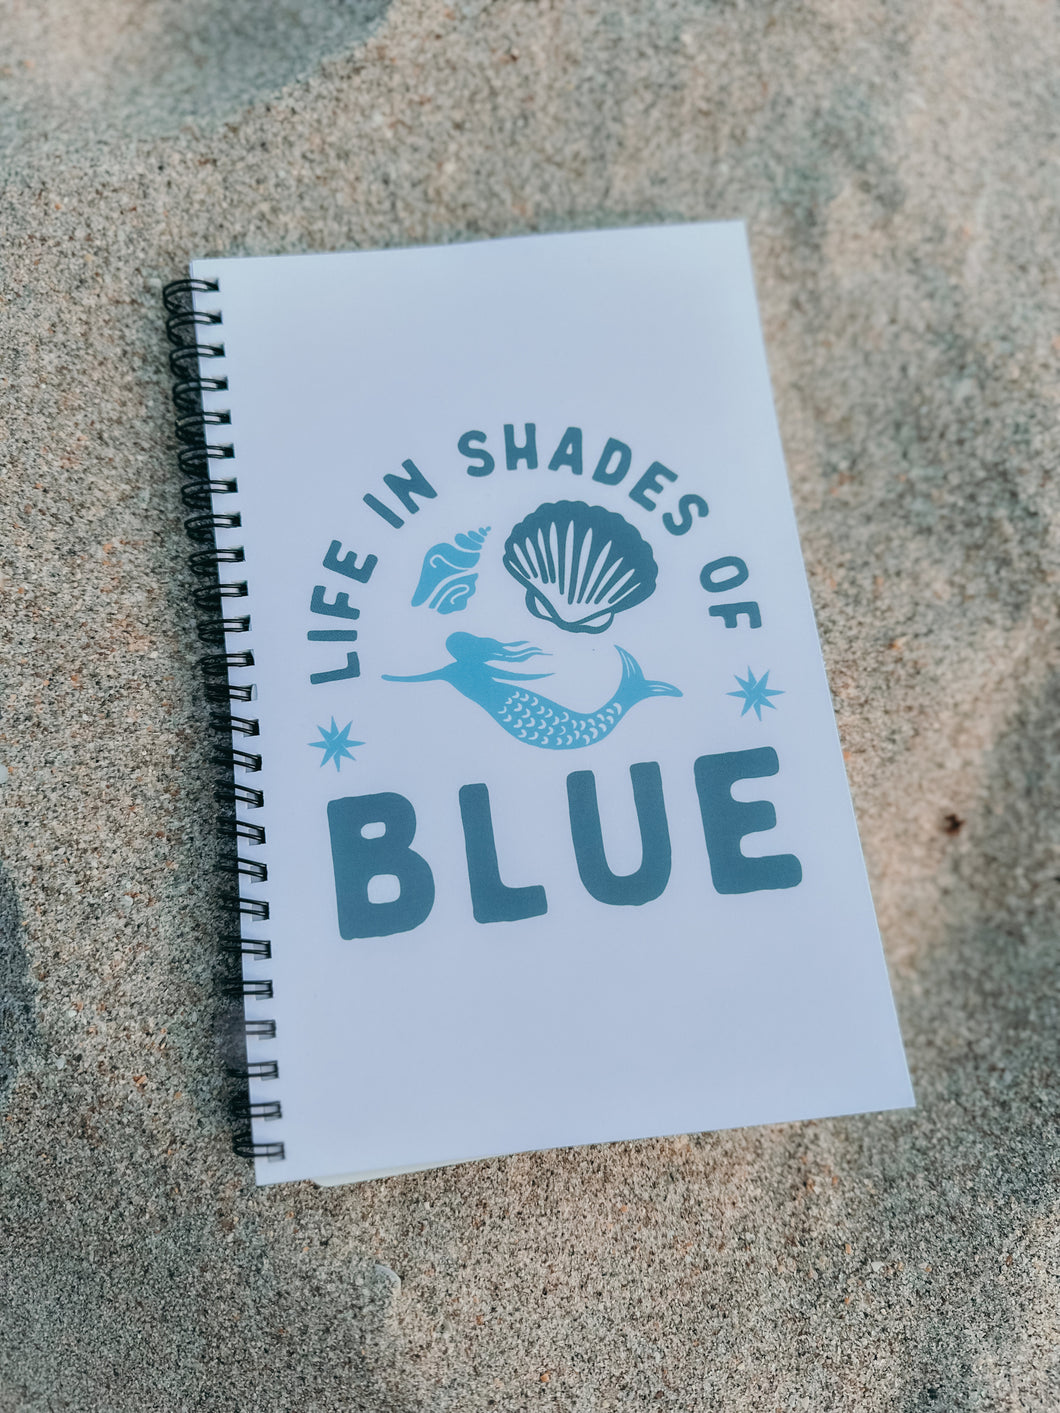 life in shades of blue journal notebook r by gabriella gerbasi